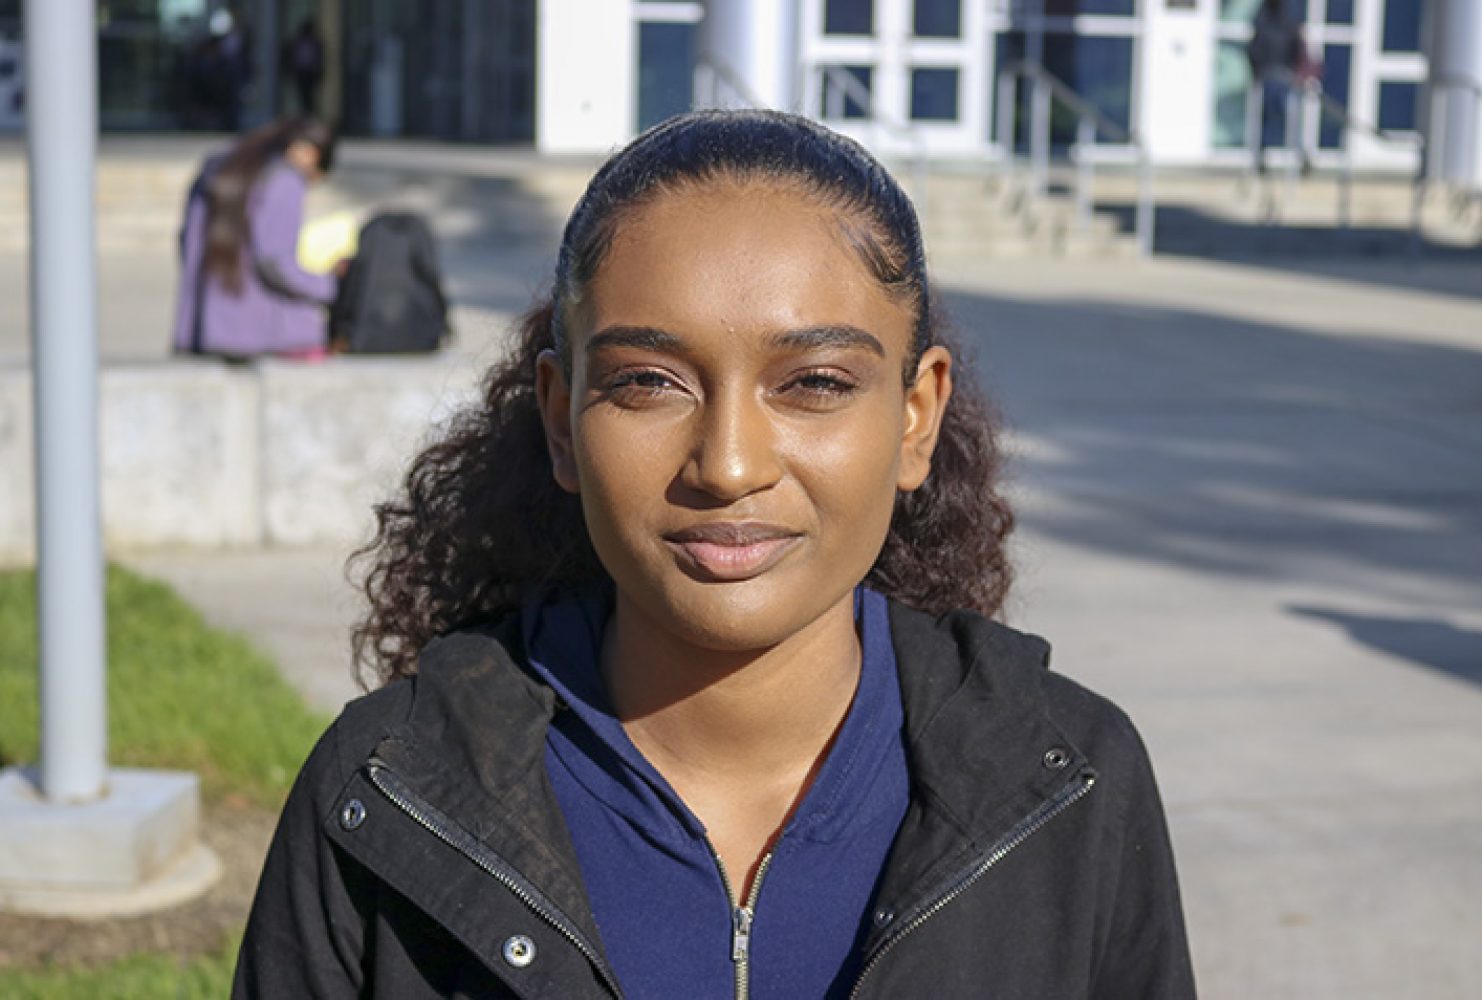 “I’ve made (resolutions) in the past. I’d say I was going to workout or walk the dog more and then I just didn’t. I got lazy and forgot about it because it wasn’t important to me.” -Avani Connon | Criminal Justice